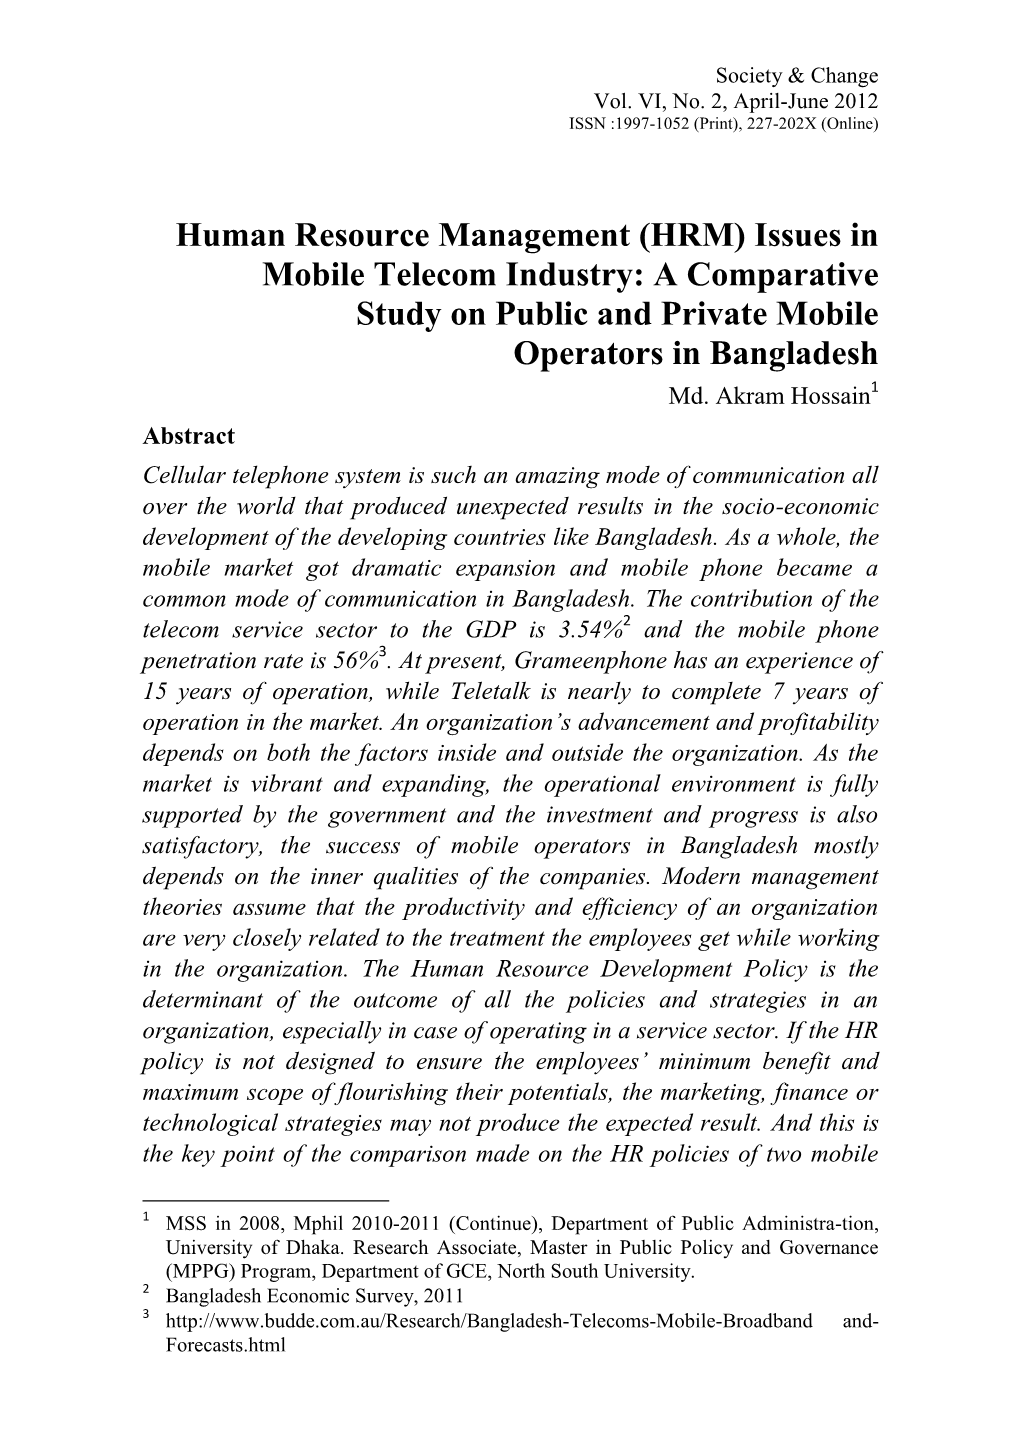 Human Resource Management (HRM) Issues in Mobile Telecom Industry: a Comparative Study on Public and Private Mobile Operators in Bangladesh Md